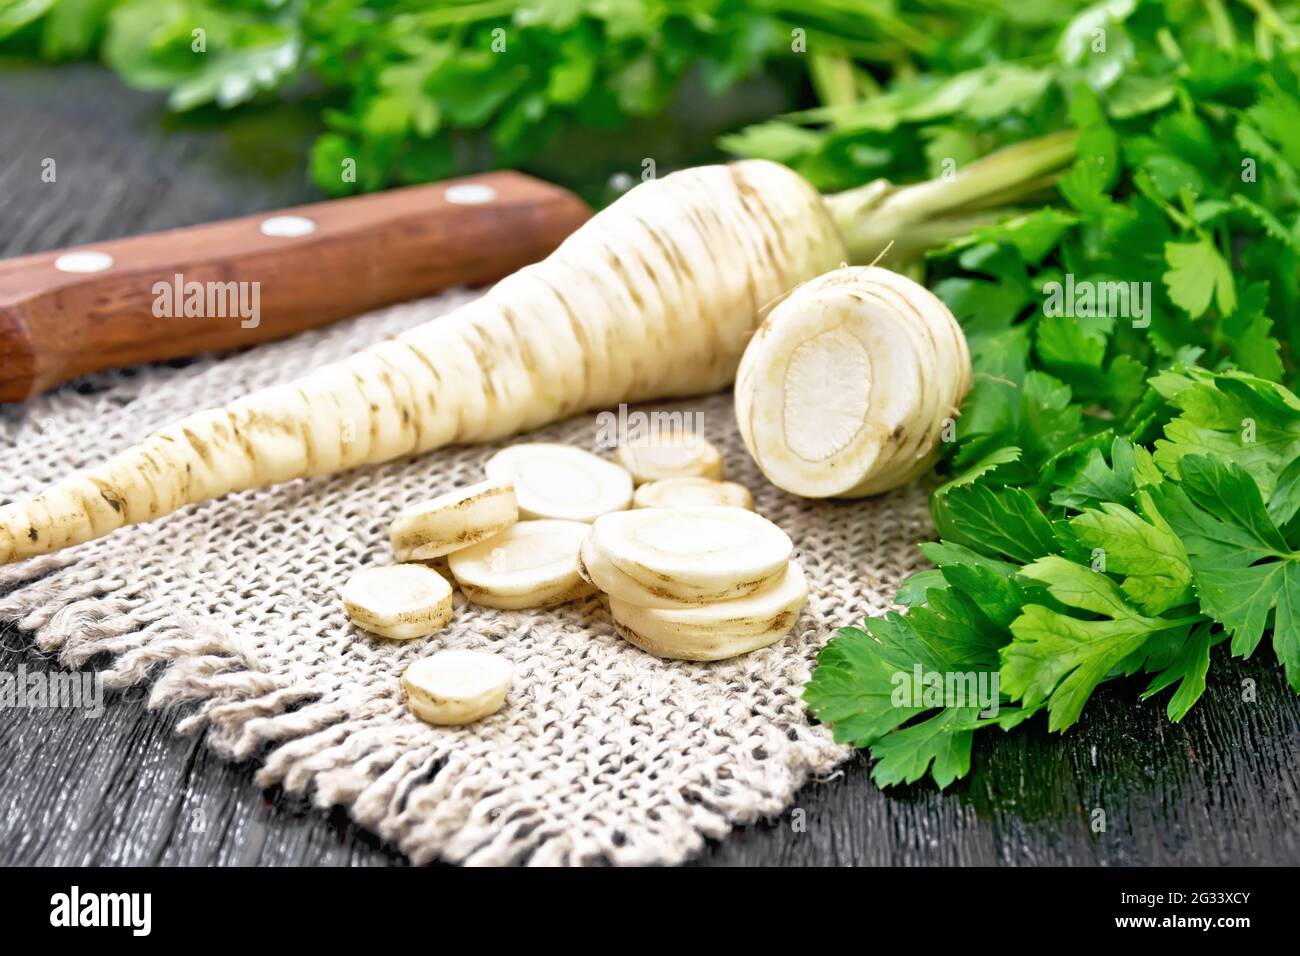 Parsley roots whole and chopped with green tops on burlap napkin and a knife on wooden board background Stock Photo